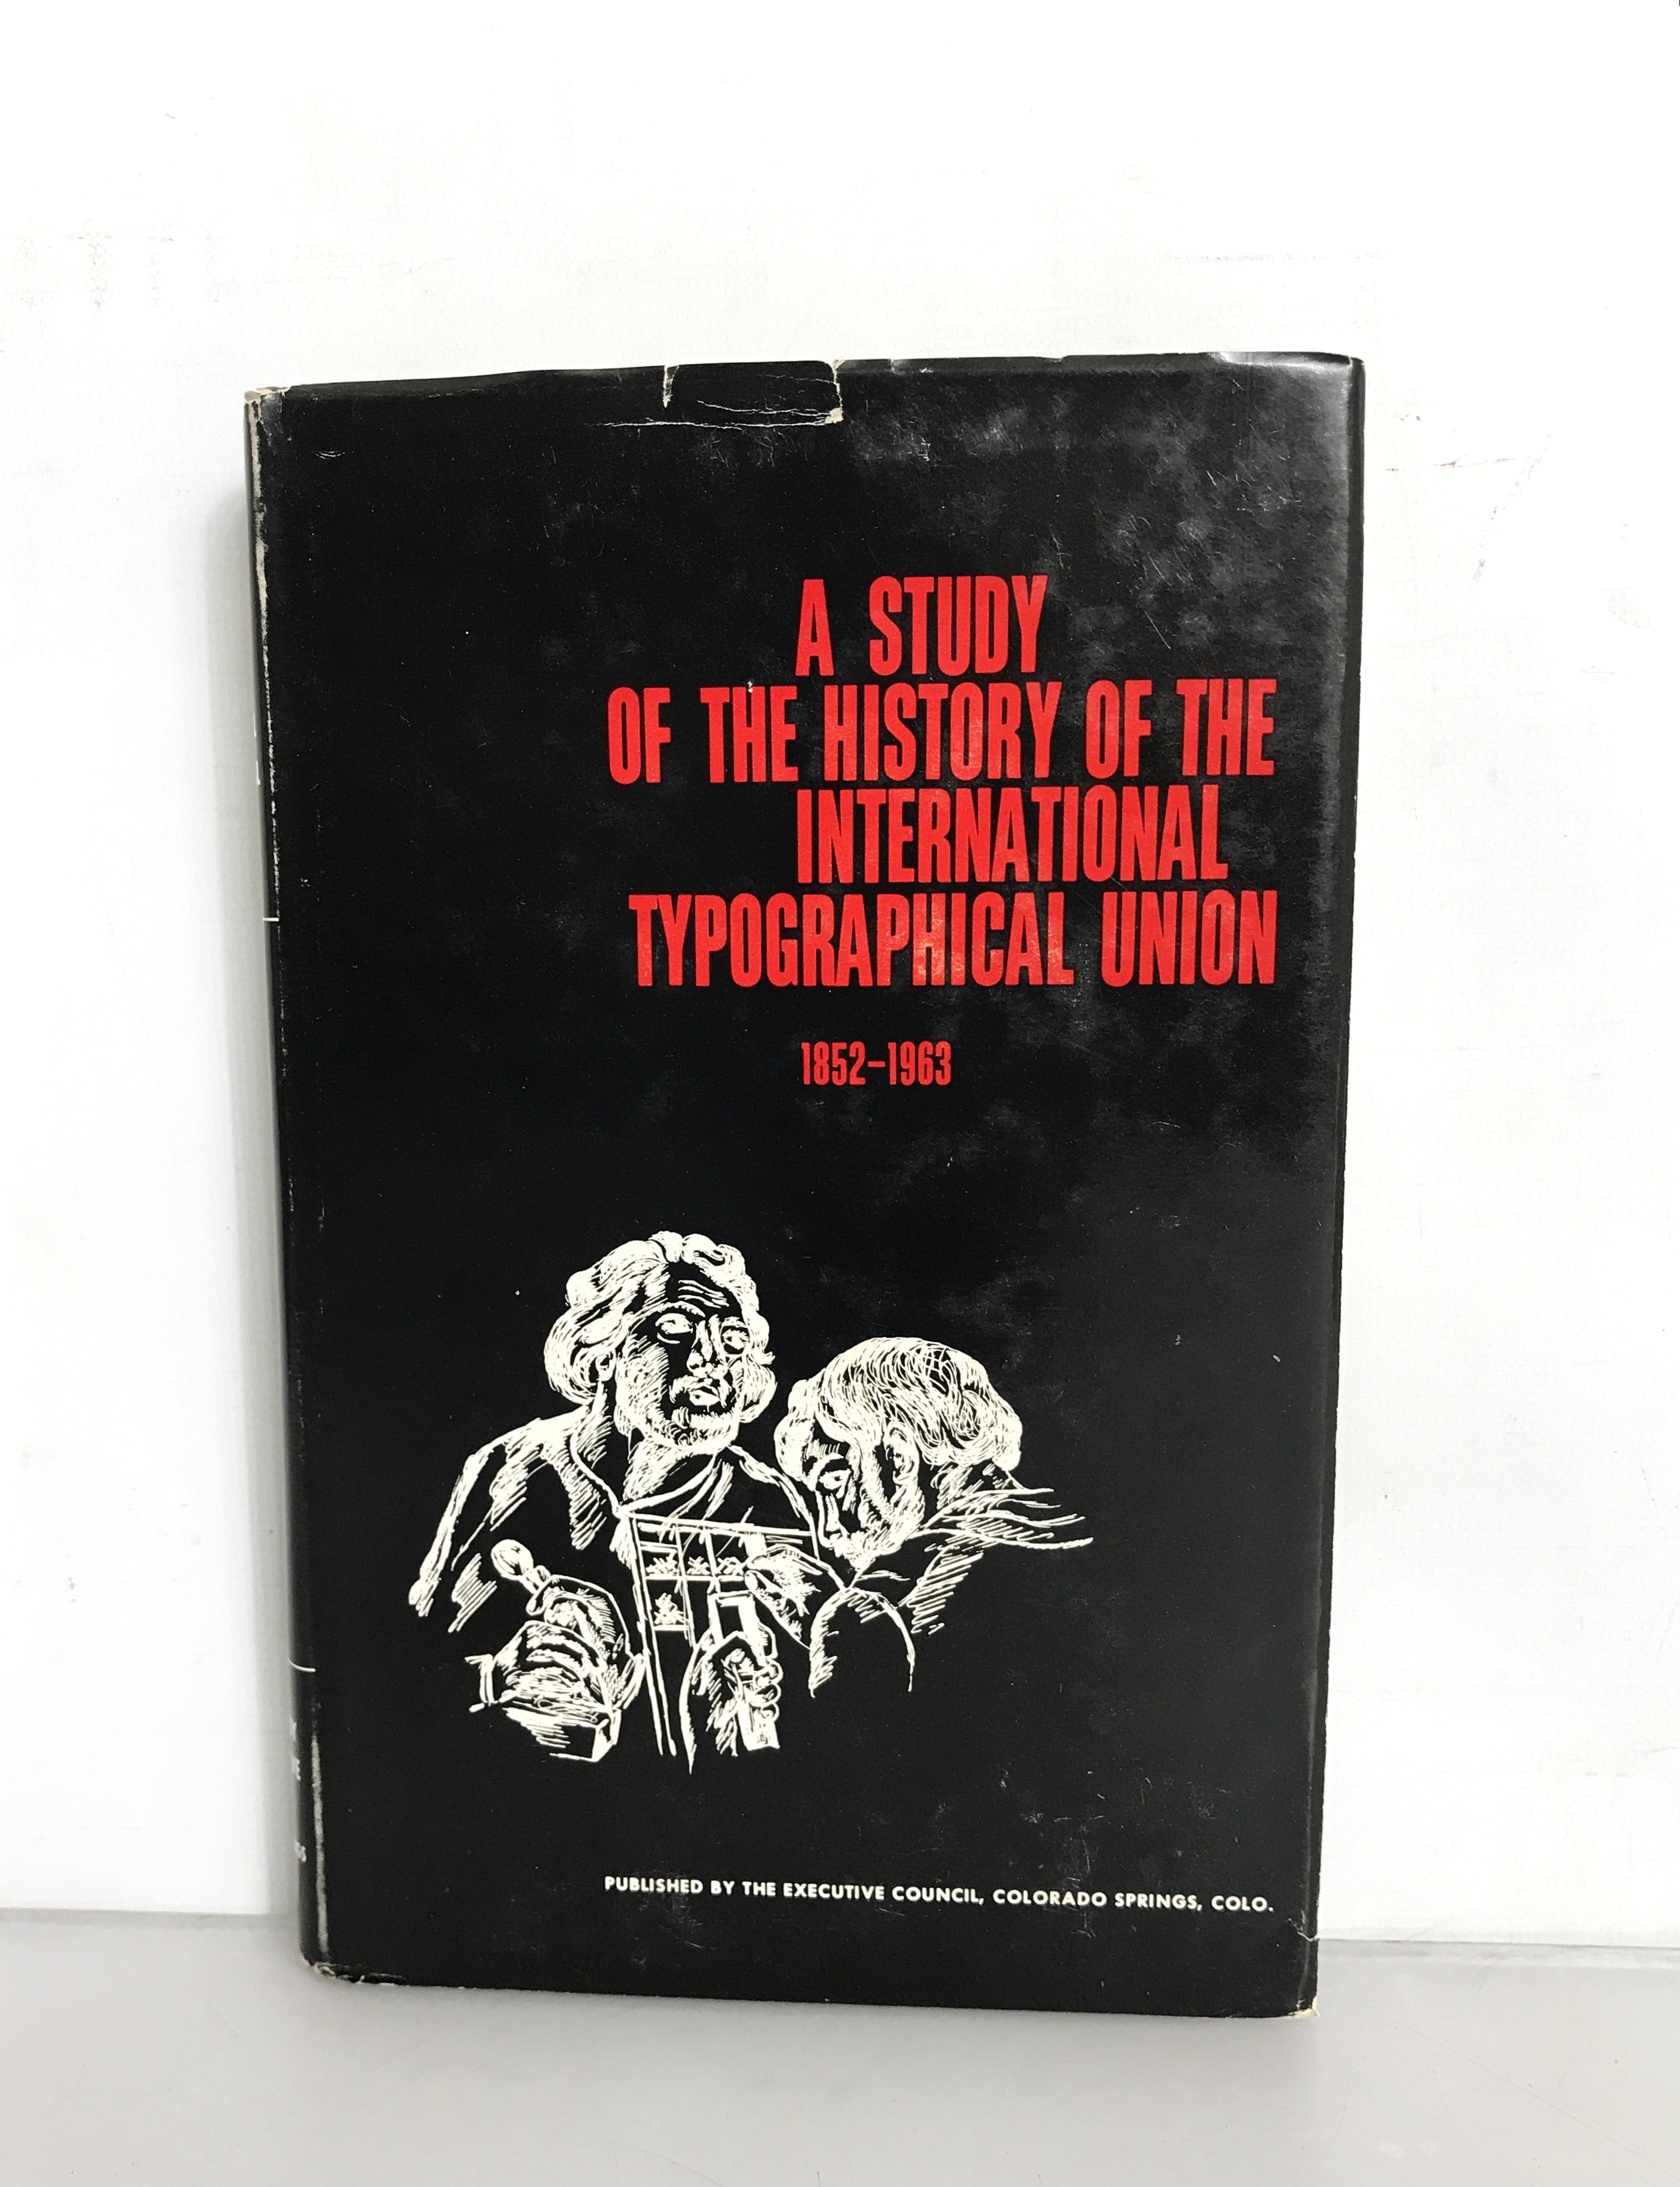 A Study of the History of the International Typographical Union 1852-1963 Vol 1 HC DJ